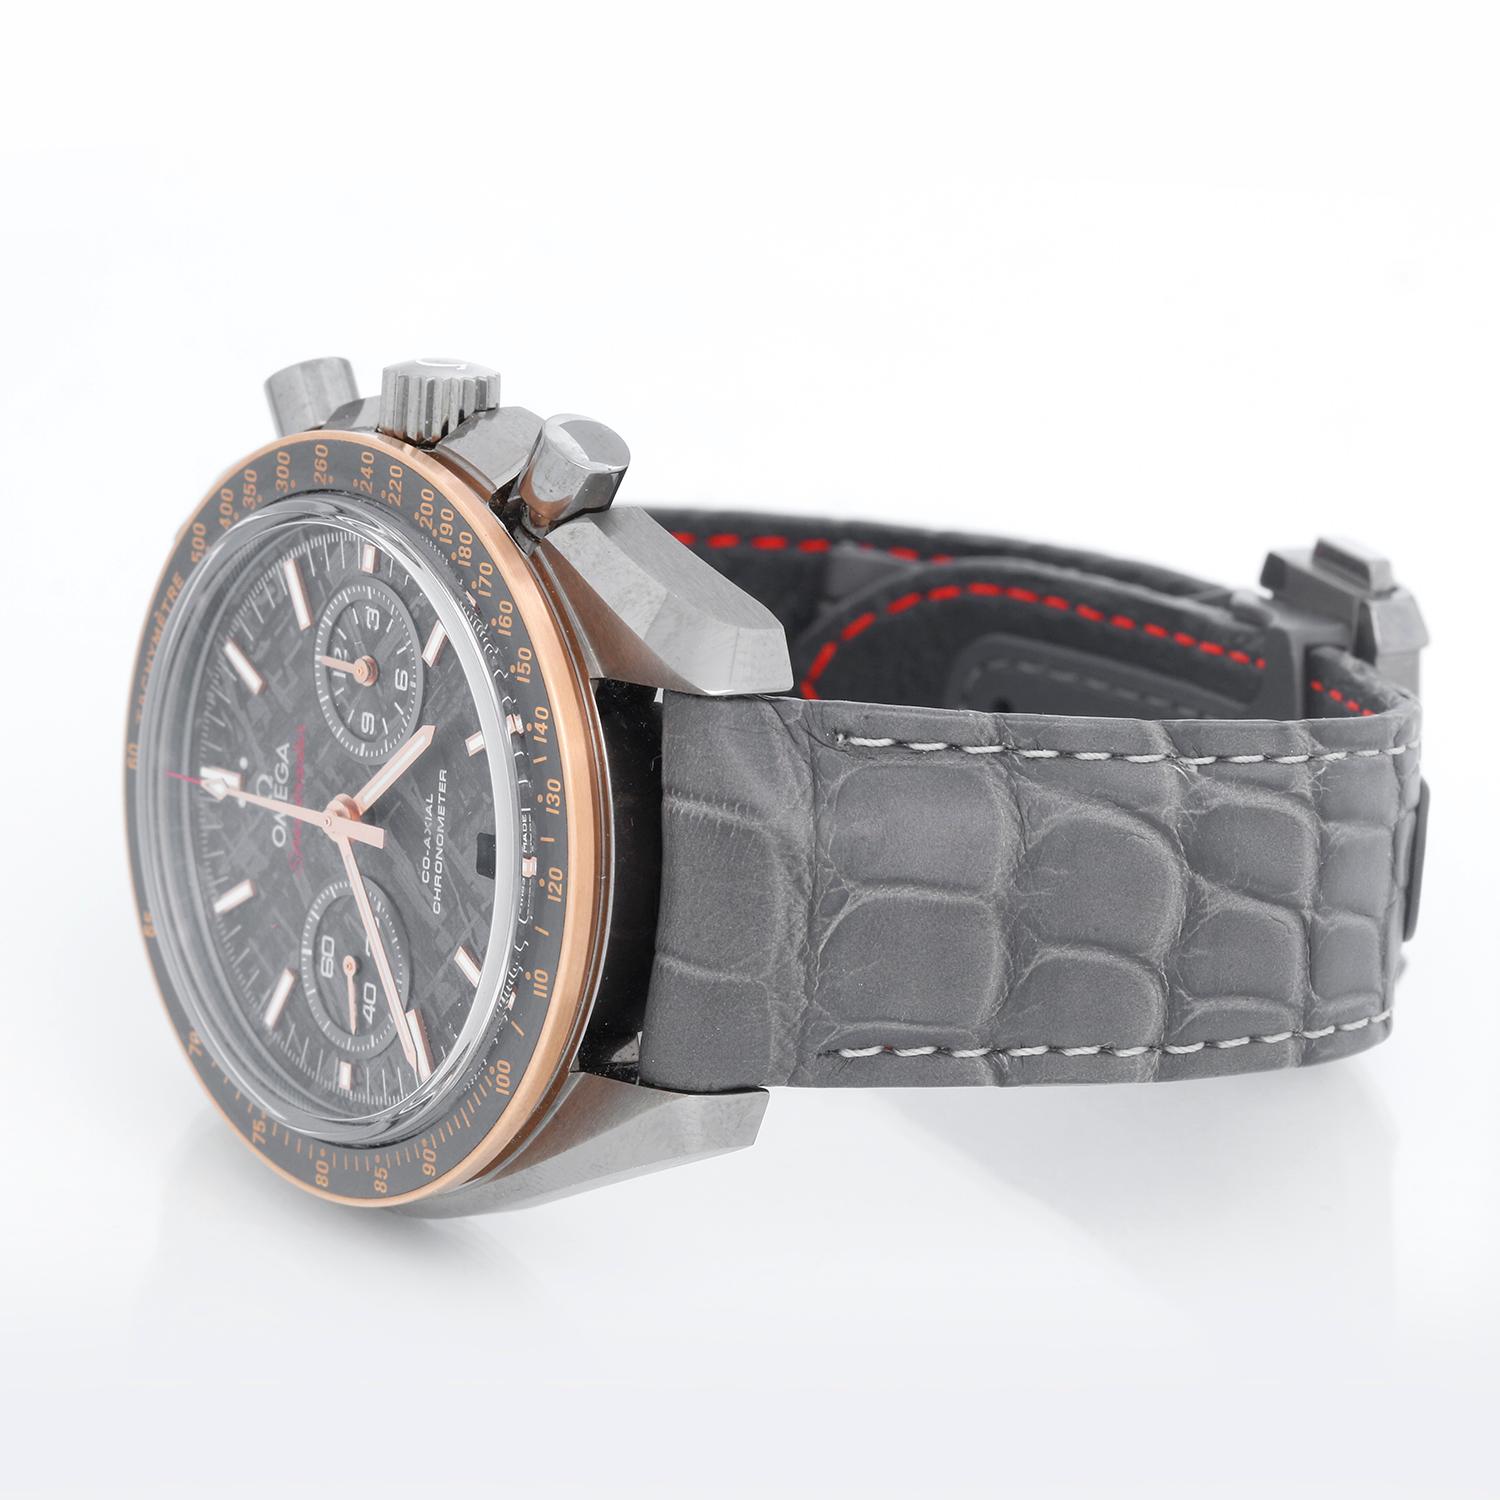 Omega Speedmaster Grey Side of The Moon  Watch 311.63.44.51.99.002 - Automatic winding. Grey ceramic with 18K gold bezel and brushed tachcymeter scale  (44.5mm diameter). Meteorite dial; 60-minute and 12-hour recorder at 3 o’clock and a small